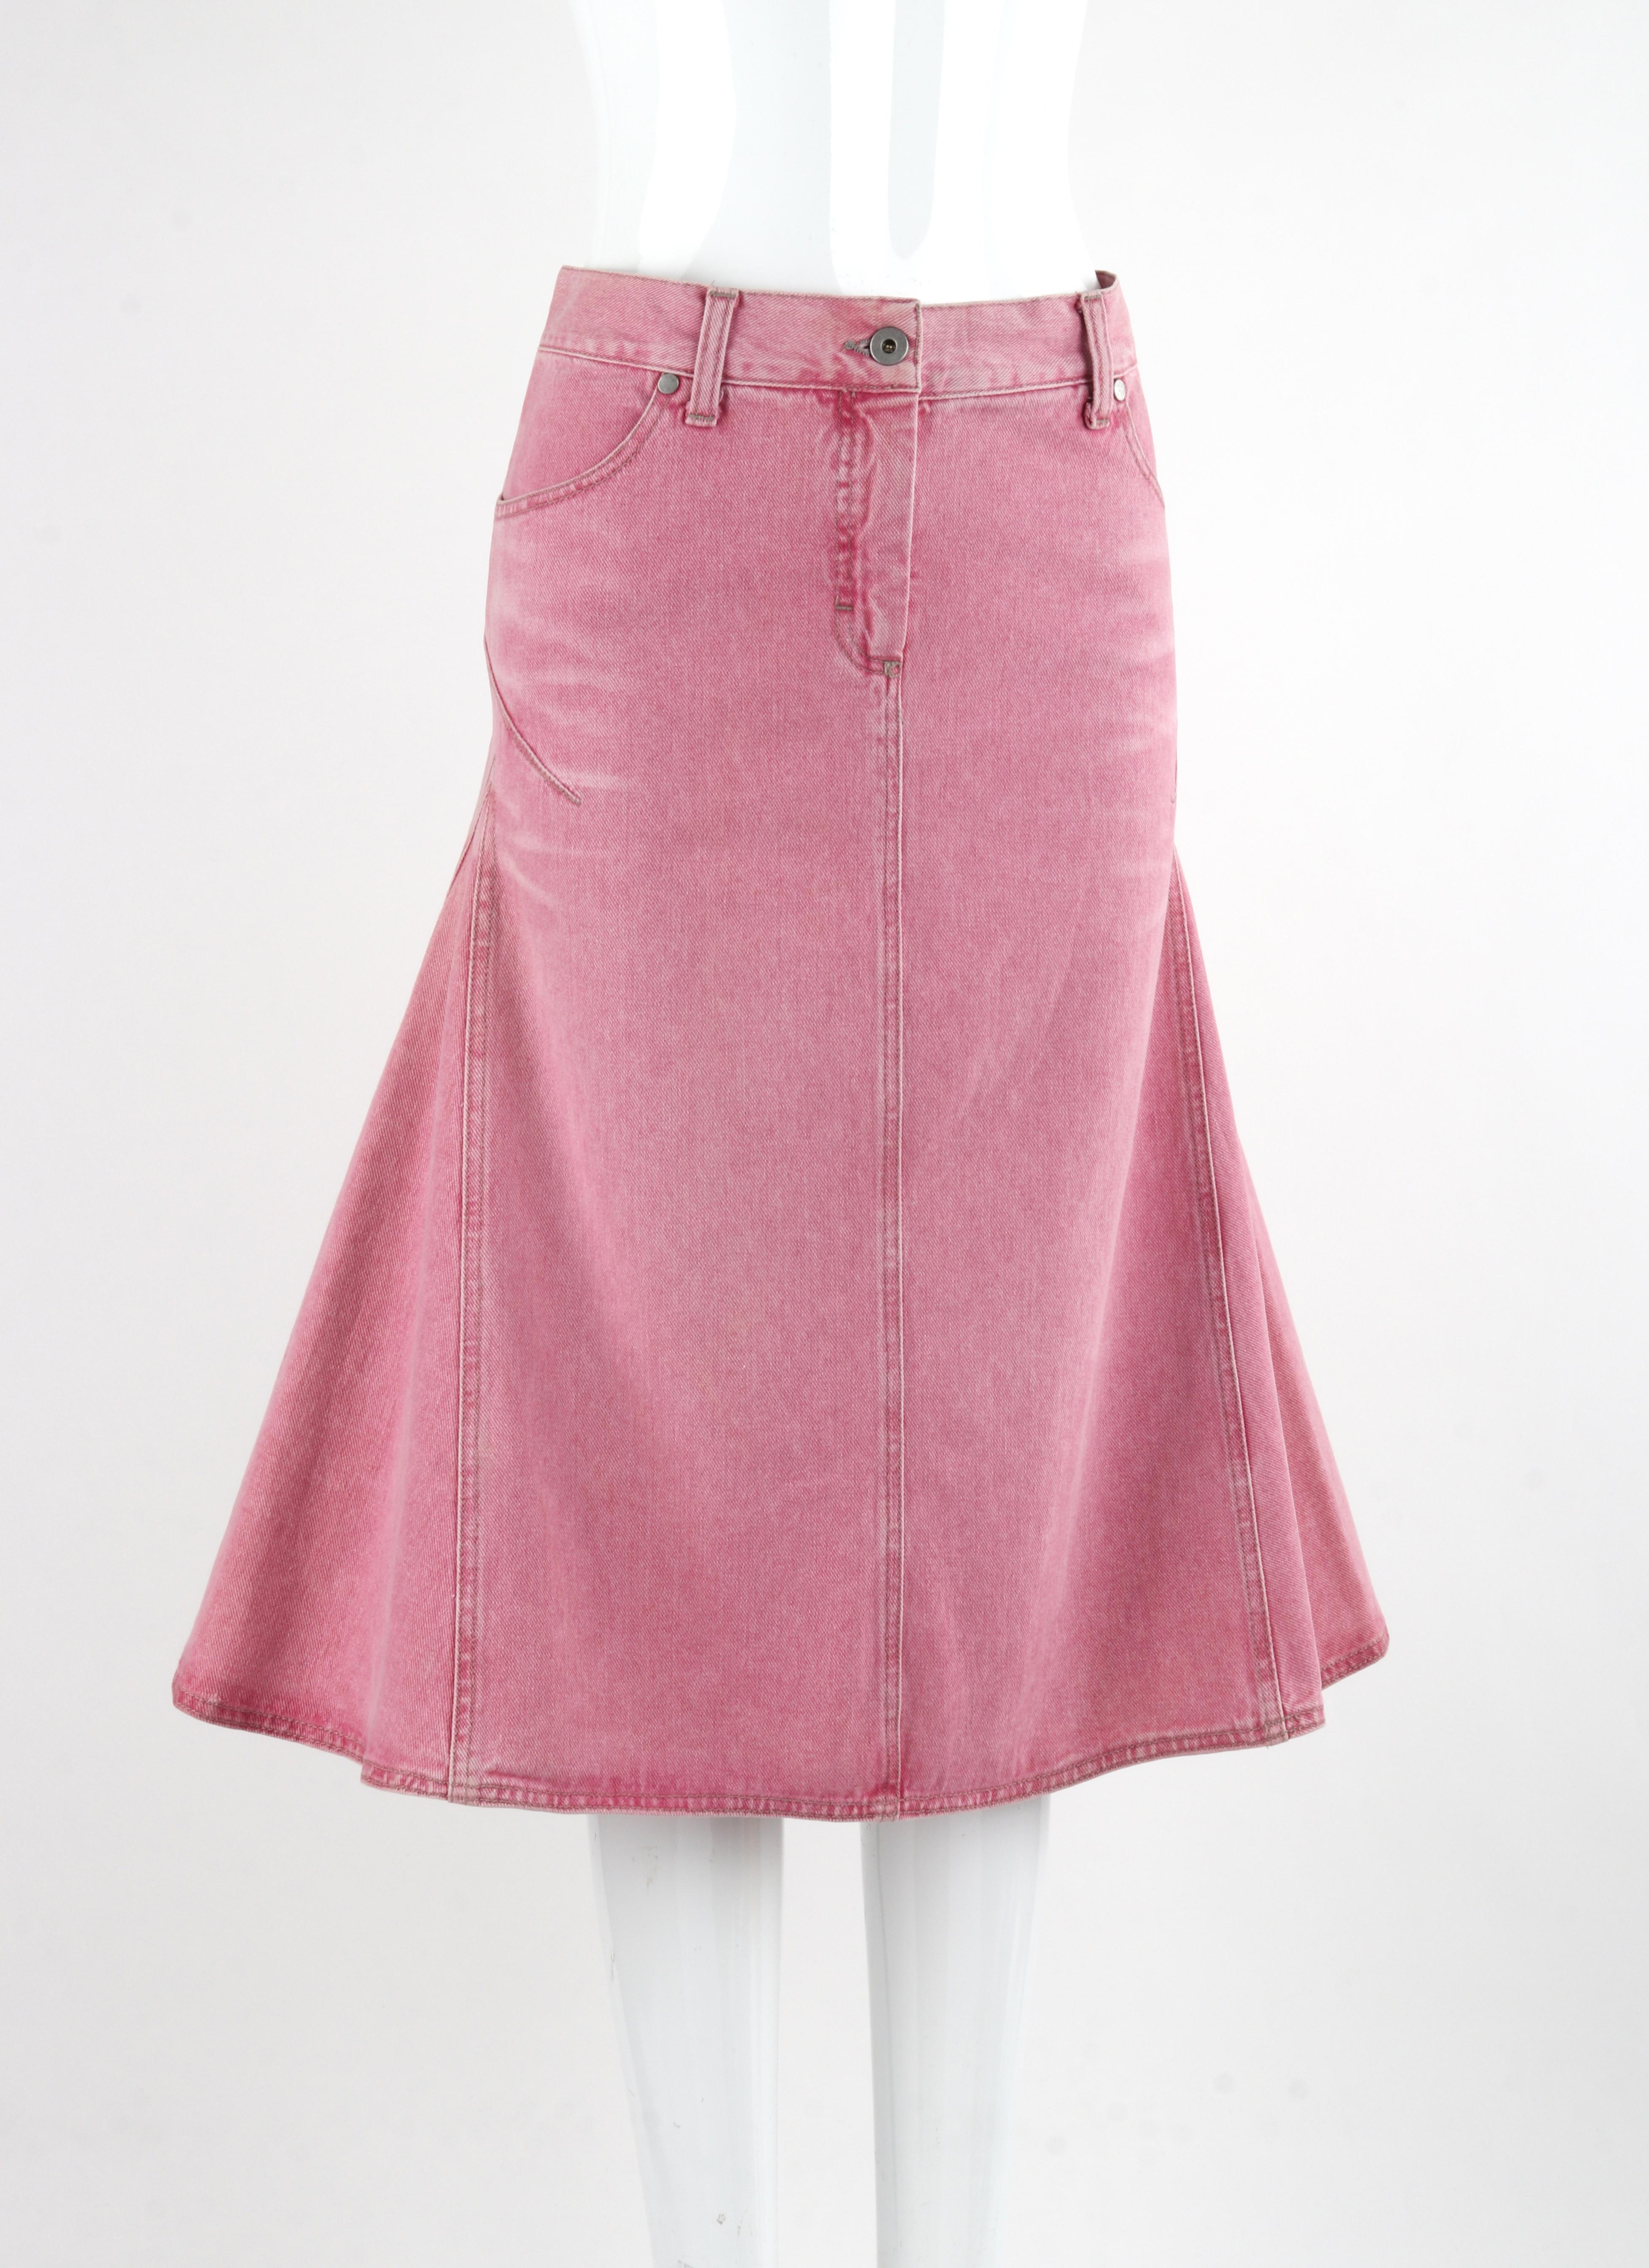 ALEXANDER McQUEEN c.1996 Pink Denim Structured Fit Midi Flared Pencil Skirt In Good Condition For Sale In Thiensville, WI